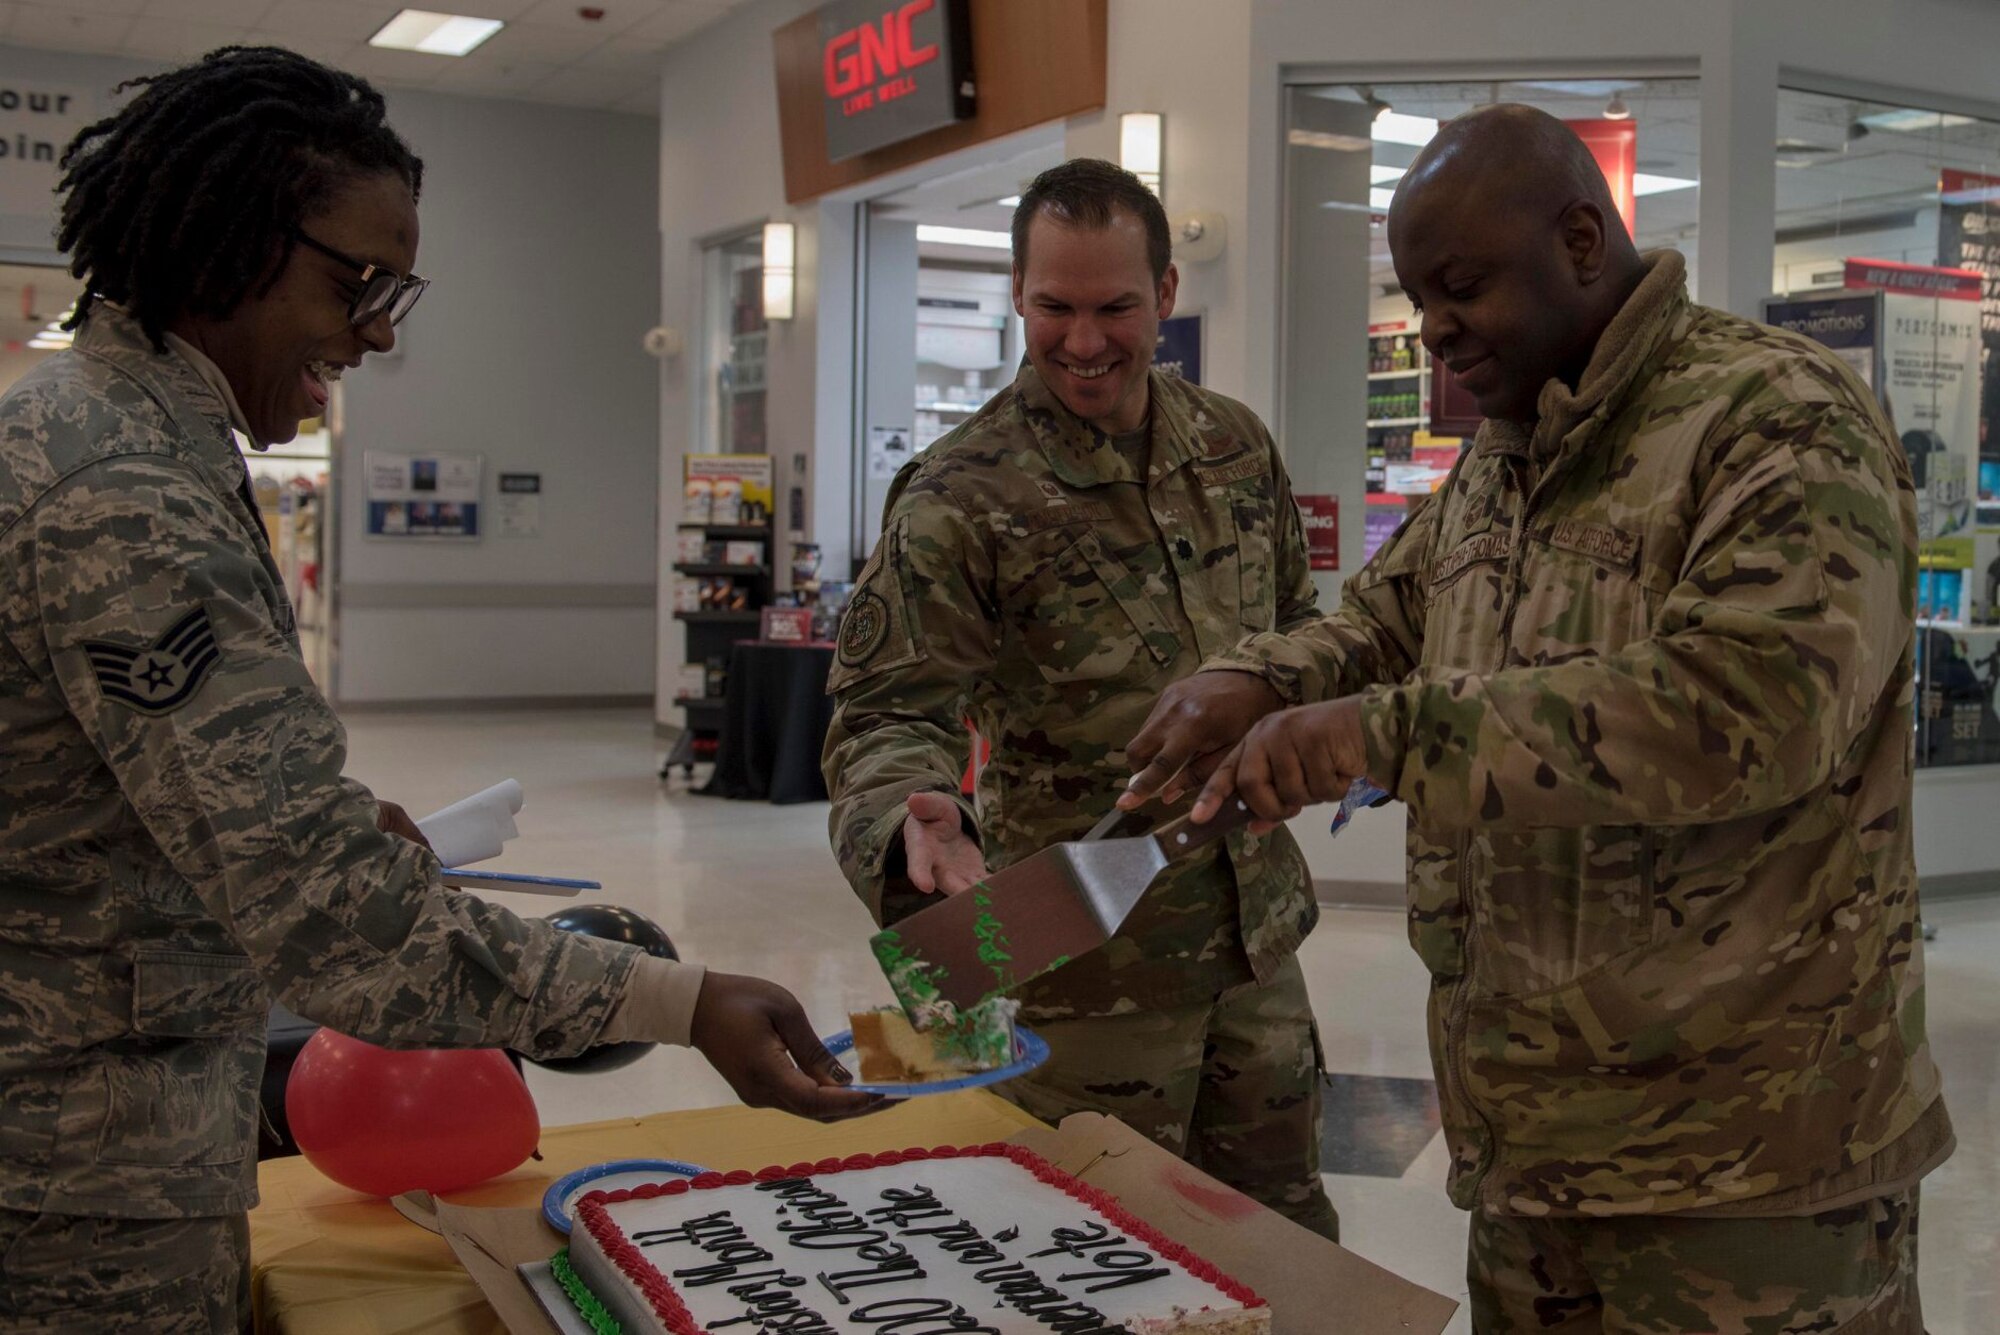 Airmen from the 354th Fighter Wing enjoy cake during the 2020 Black History Month Kickoff on Eielson Air Force Base, Alaska, Feb. 3, 2020. The council held two events during the month to celebrate African American achievements and advancements. (U.S. Air Force photo by Airman 1st Class Aaron Larue Guerrisky)